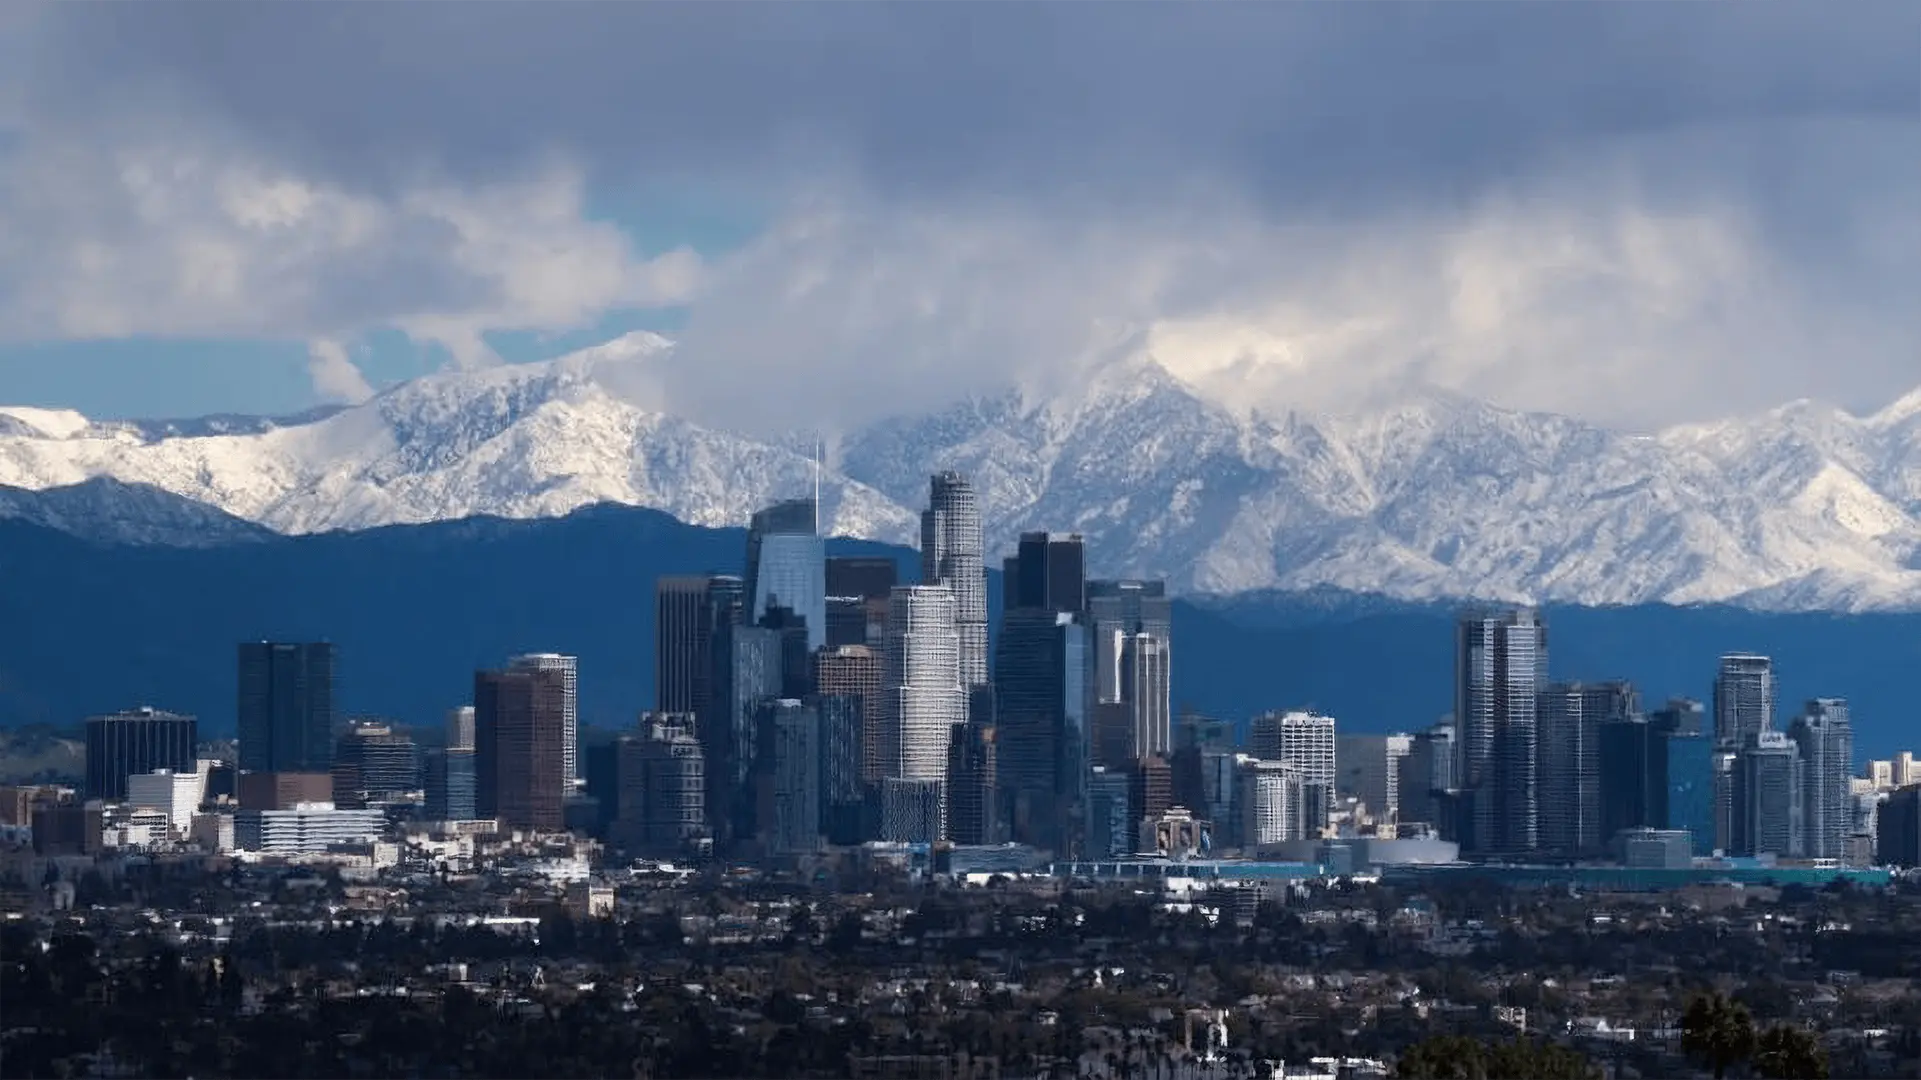 An image of the snow-capped mountains bordering the Los Angeles basin, seen under a clear blue sky dotted with white clouds. The wet streets reflect the morning light, symbolizing the cleansing power of rain, and a distant path leads towards a hidden valley, representing the spiritual journey described in the article. by Ted Tschopp